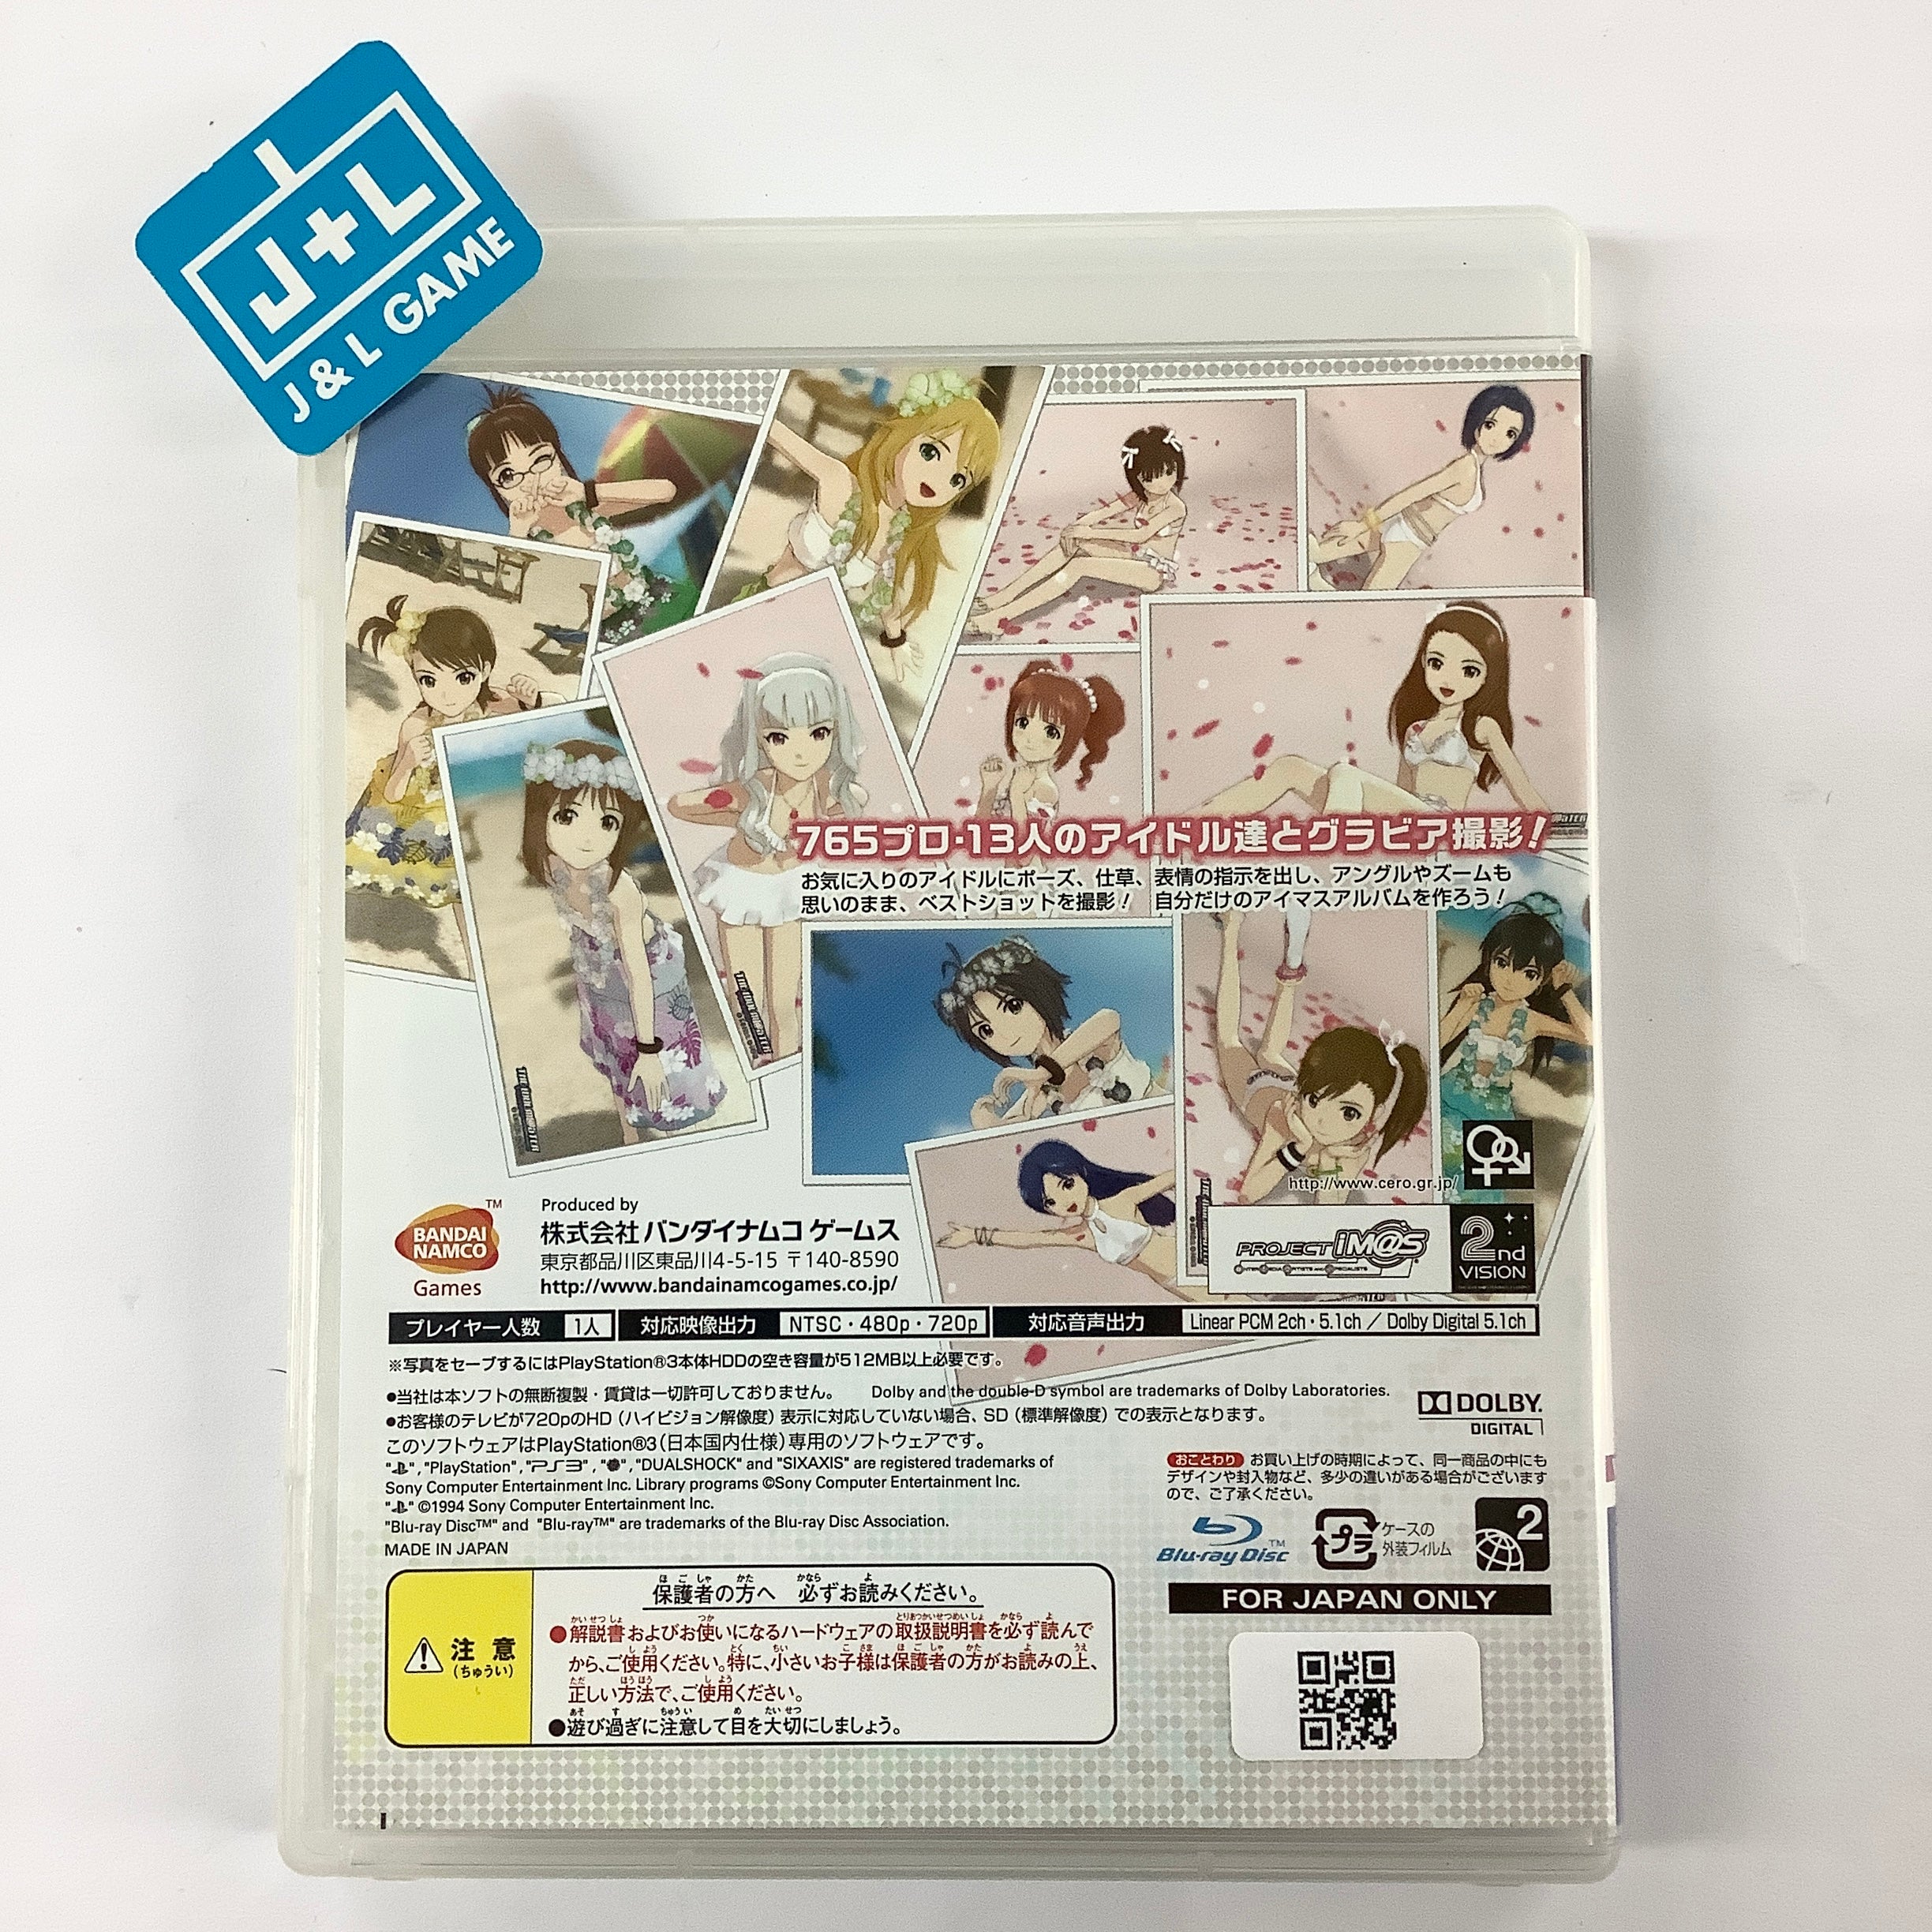 The Idolm@ster: Gravure For You! Vol. 4 - (PS3) PlayStation 3 [Pre-Owned] (Japanese Import) Video Games Bandai Namco Games   